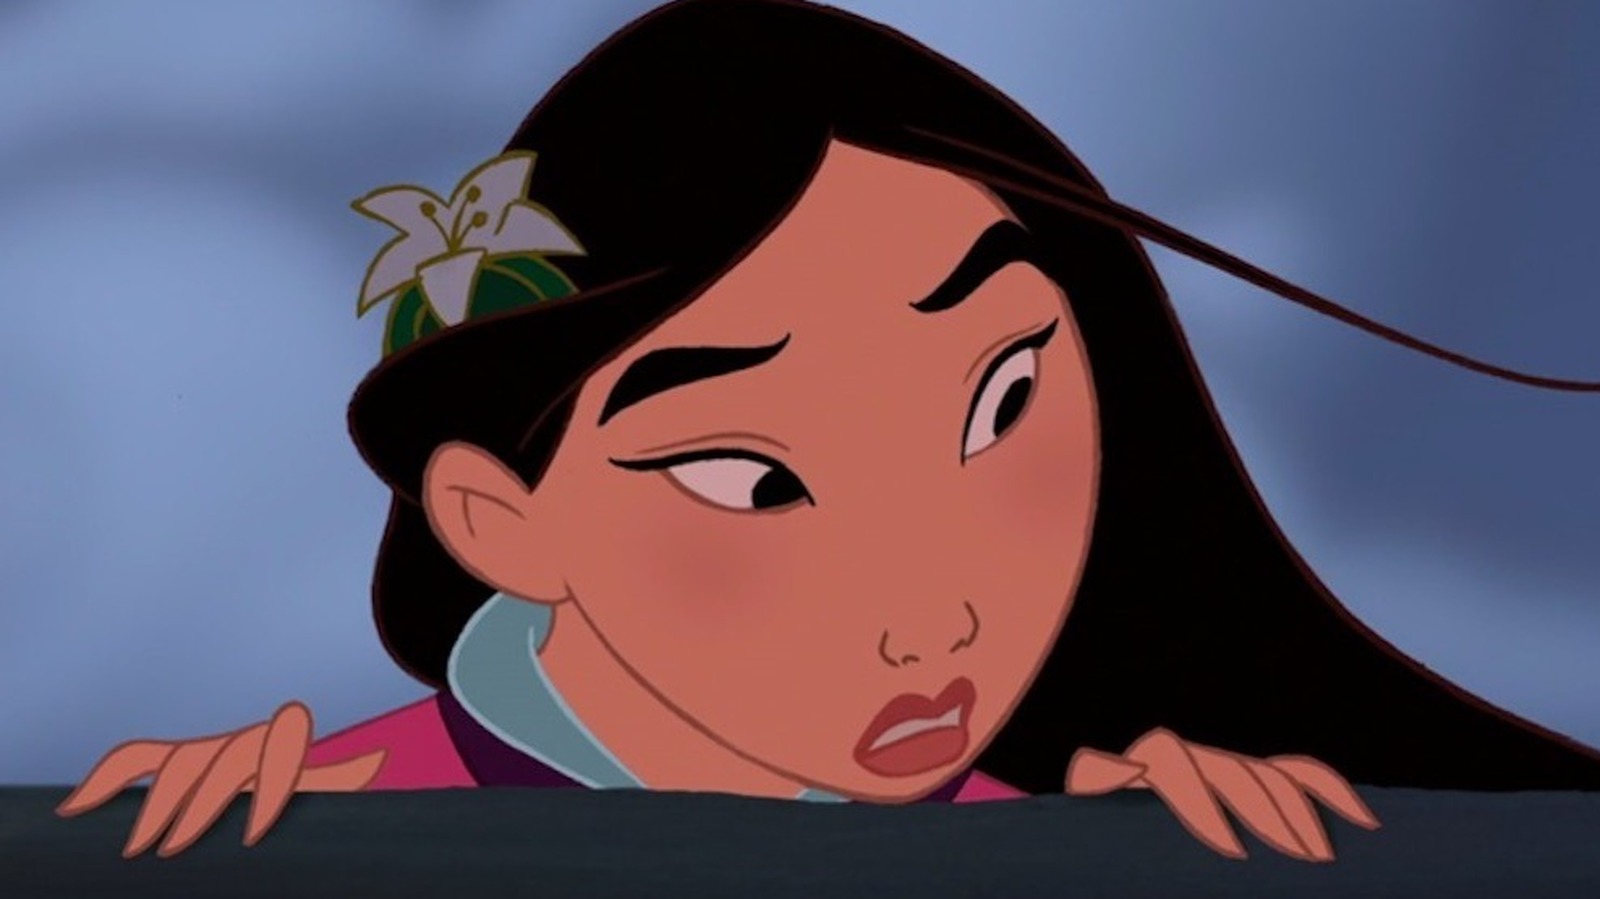 Ming-Na Wen Explains Her 'Mulan' Cameo and Weighs in on Haircutting